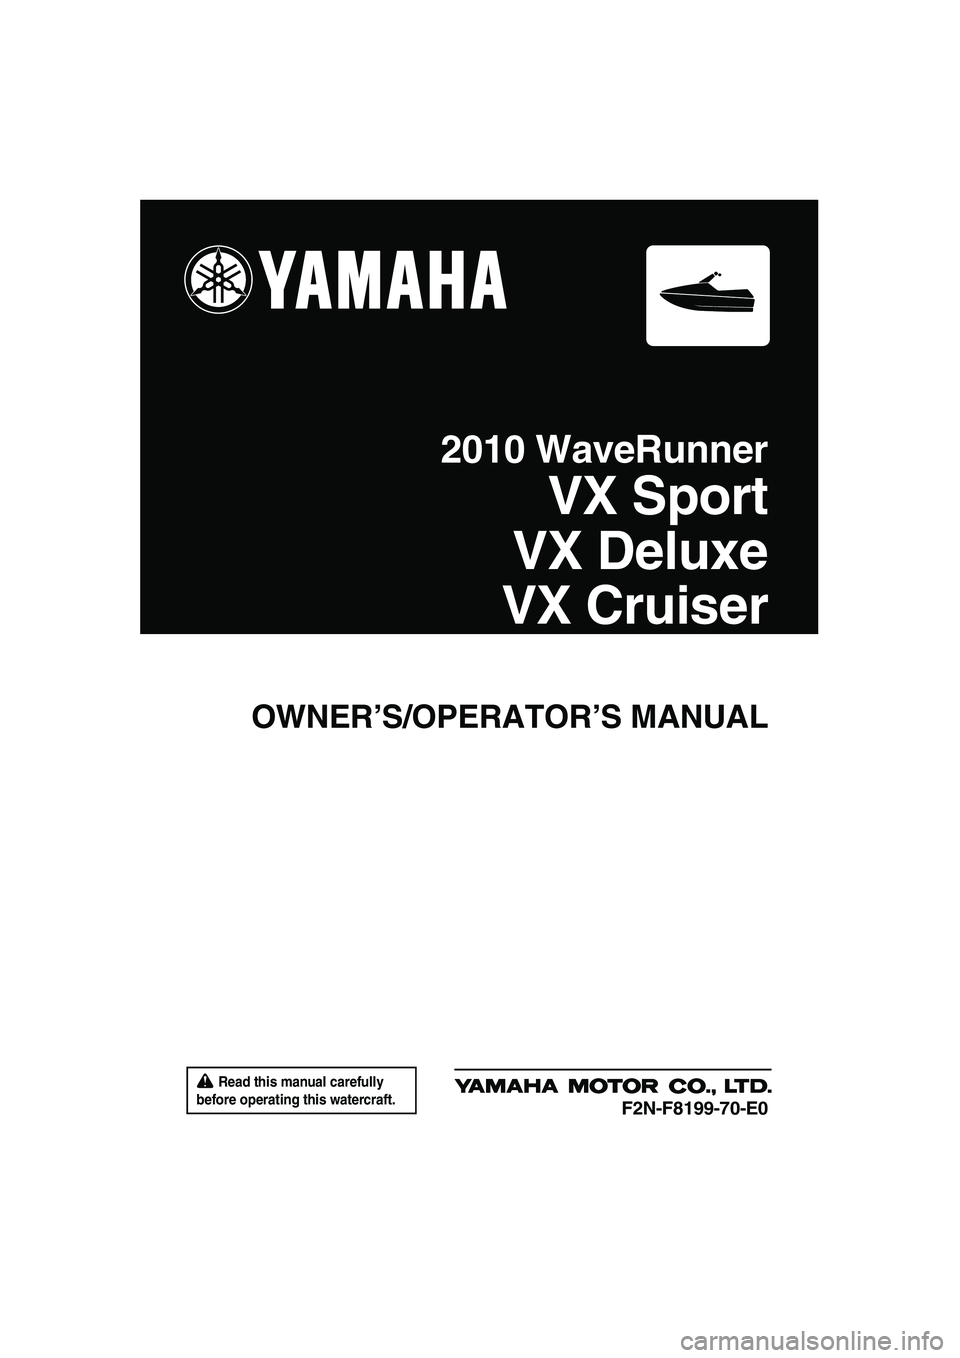 YAMAHA VX SPORT 2010  Owners Manual  Read this manual carefully 
before operating this watercraft.
OWNER’S/OPERATOR’S MANUAL
2010 WaveRunner
VX Sport
VX Deluxe
VX Cruiser
F2N-F8199-70-E0
UF2N70E0.book  Page 1  Tuesday, October 6, 20